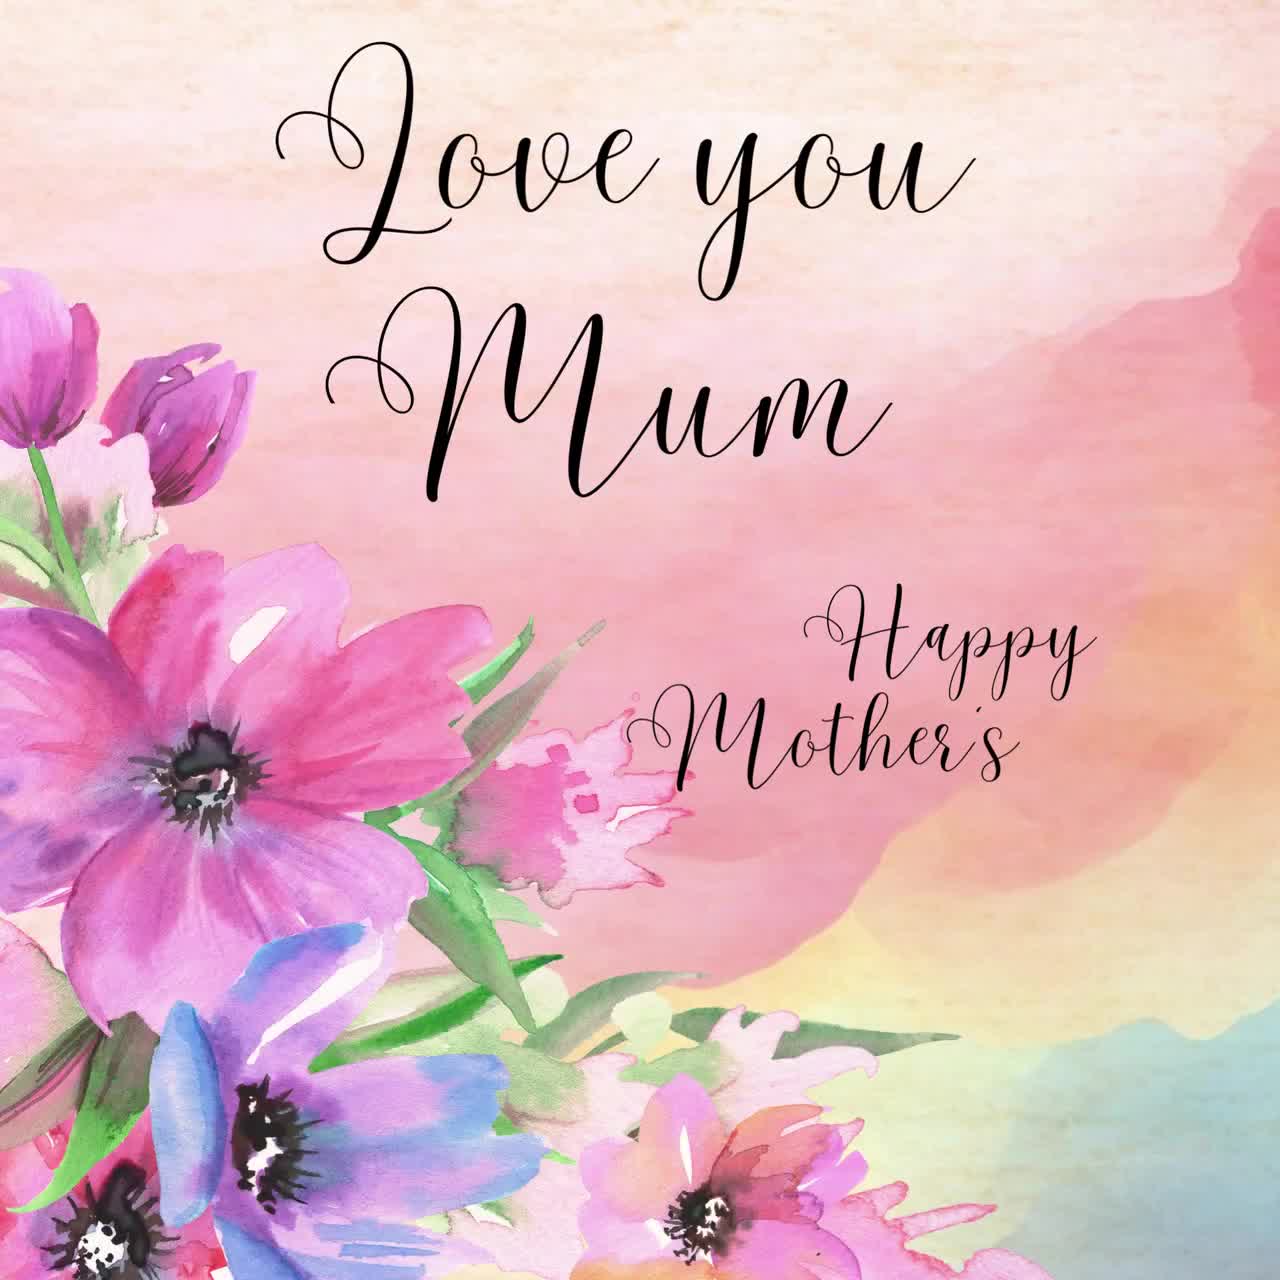 Happy Mothers Day Images, Pictures And Photos Download  Happy mothers day  wishes, Happy mother's day card, Happy mothers day images